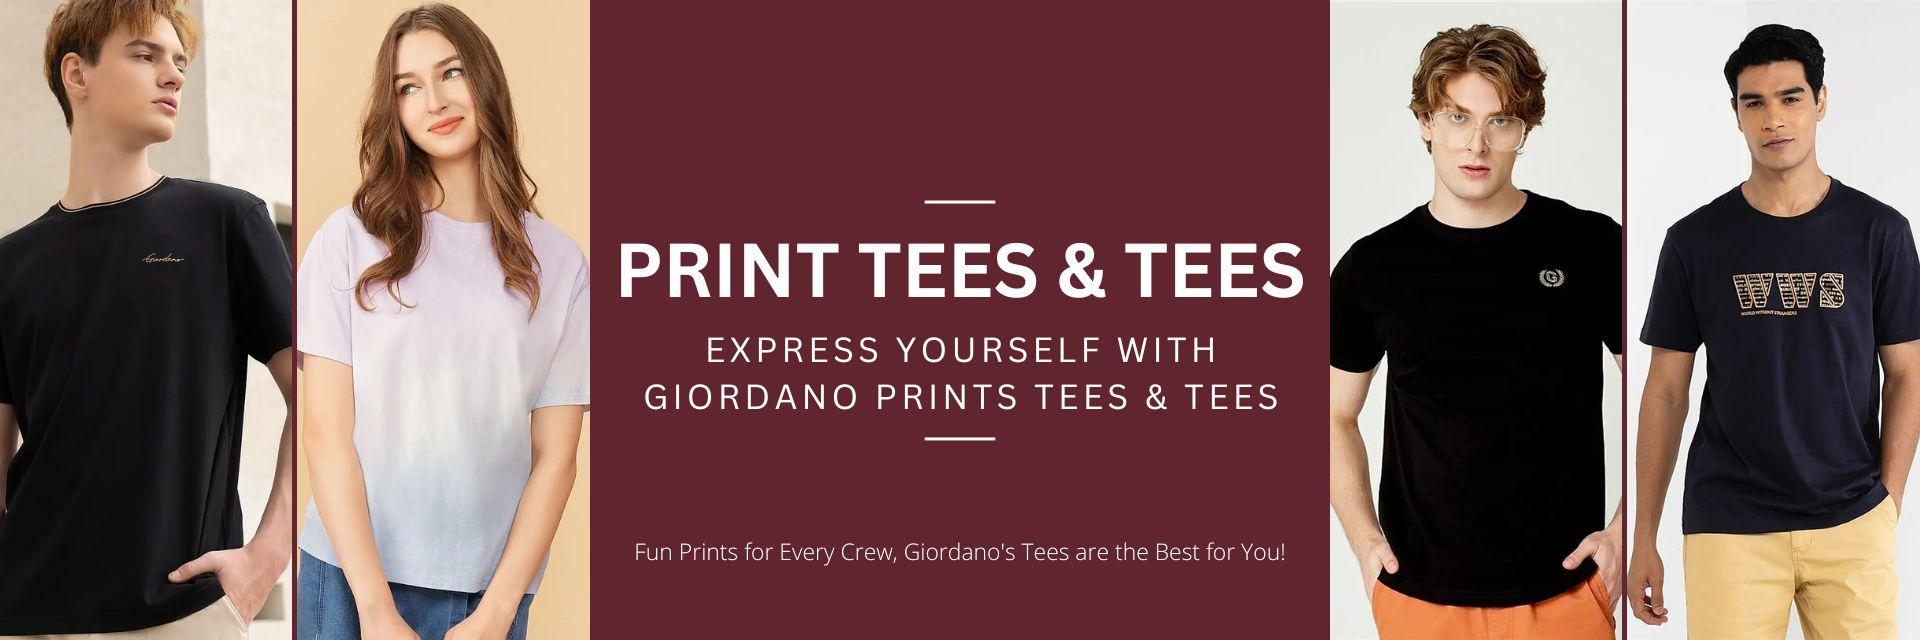 Giordano Tees & Print Tees on Sale - Get 50% off on all the items.